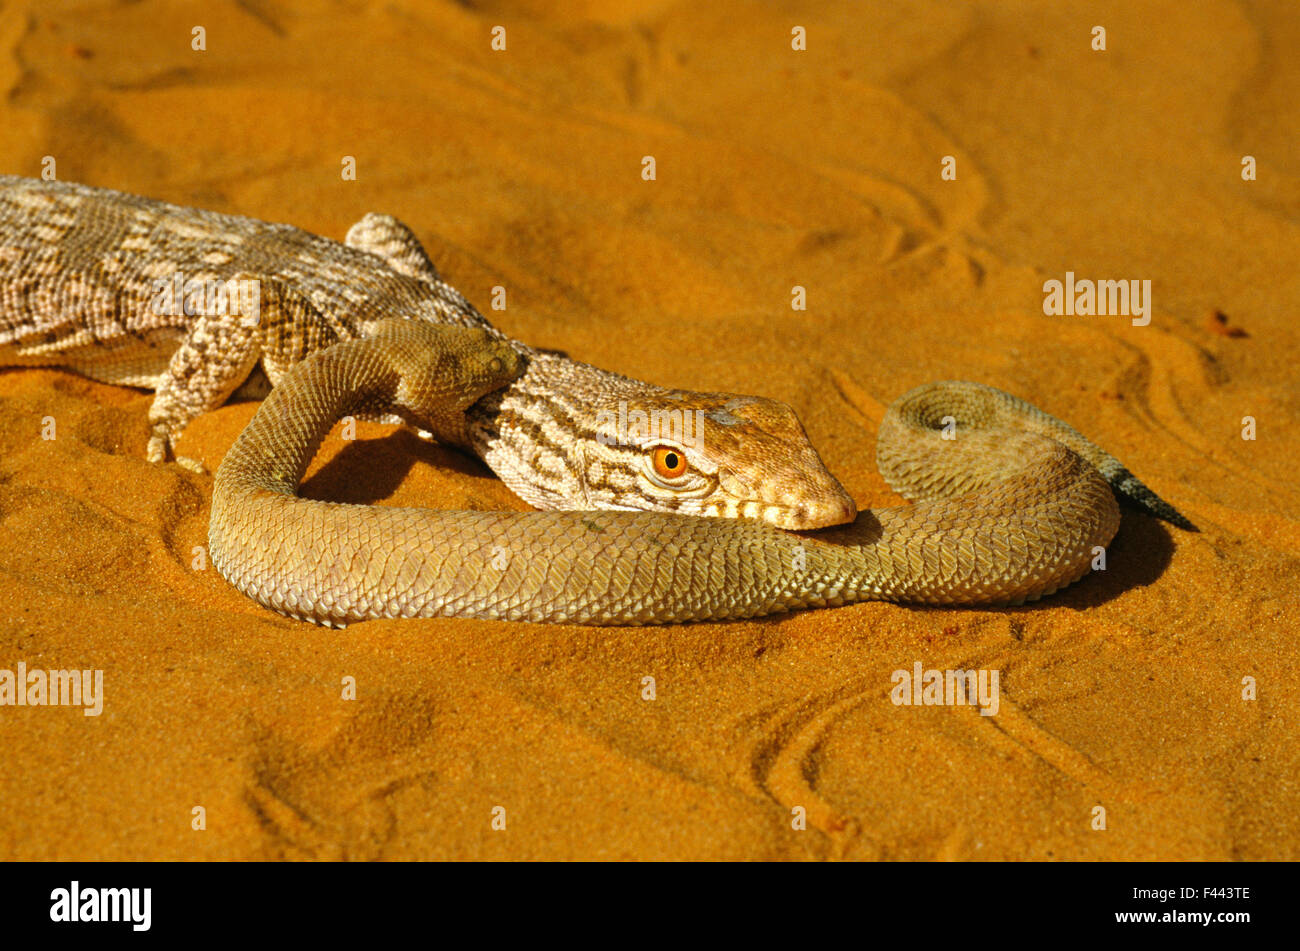 Desert monitor (Varanus griseus) attempting to eat  a Sand Viper (Cerastes vipera) a venomous snake which is defending itself by biting the monitor's neck, near Chinguetti, Mauritania Stock Photo